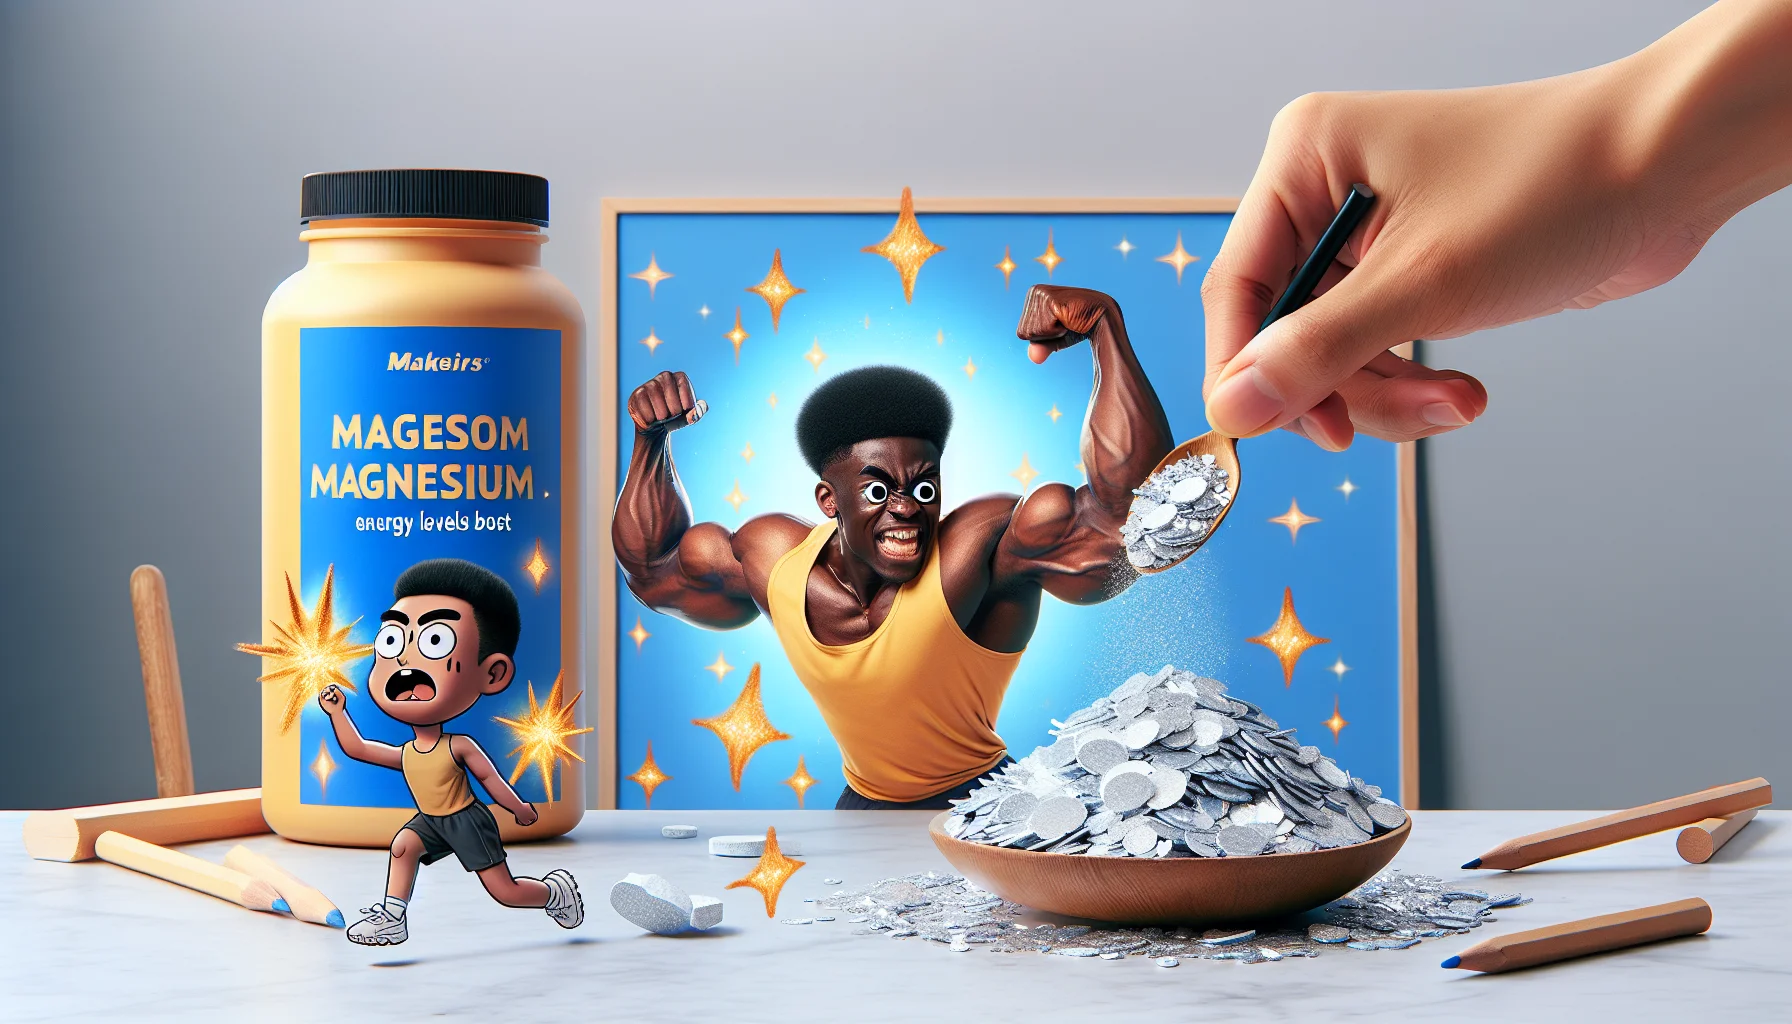 Create a humorous scene featuring magnesium flakes. These flakes appear larger than life, shining brightly on a table. Nearby, a cartoon depiction of a male East Asian athlete is pulling a face and flexing his arm muscles, boosting his performance. Adjacent to this, a female Black athlete shows a surprised expression upon witnessing the transformative power of magnesium flakes, signaling clear energy levels boost. This whimsical and captivating scenario should communicate the benefits of using magnesium flakes as a sports supplement.